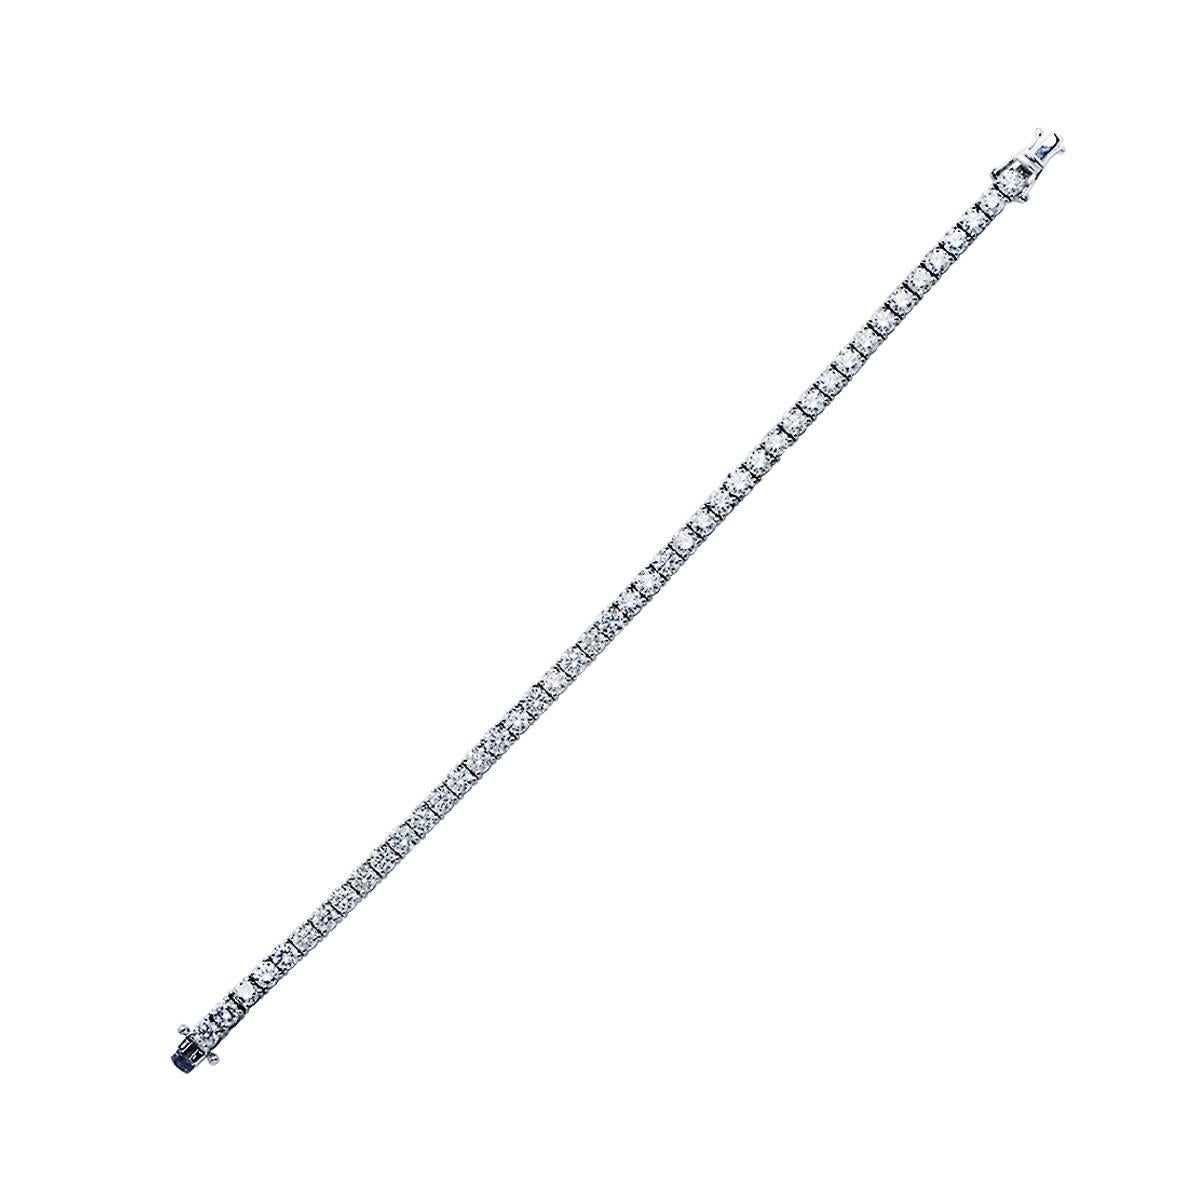 18 Karat White Gold Tennis Bracelet Featuring 49 Round Brilliant Cut Diamonds Weighing 7.47 Carats Total, G Color, VS Clarity.

Measurement: 6.75 inch Length
Weight: 11.66 grams

This Bracelet is Accompanied by a Retail Appraisal Performed by